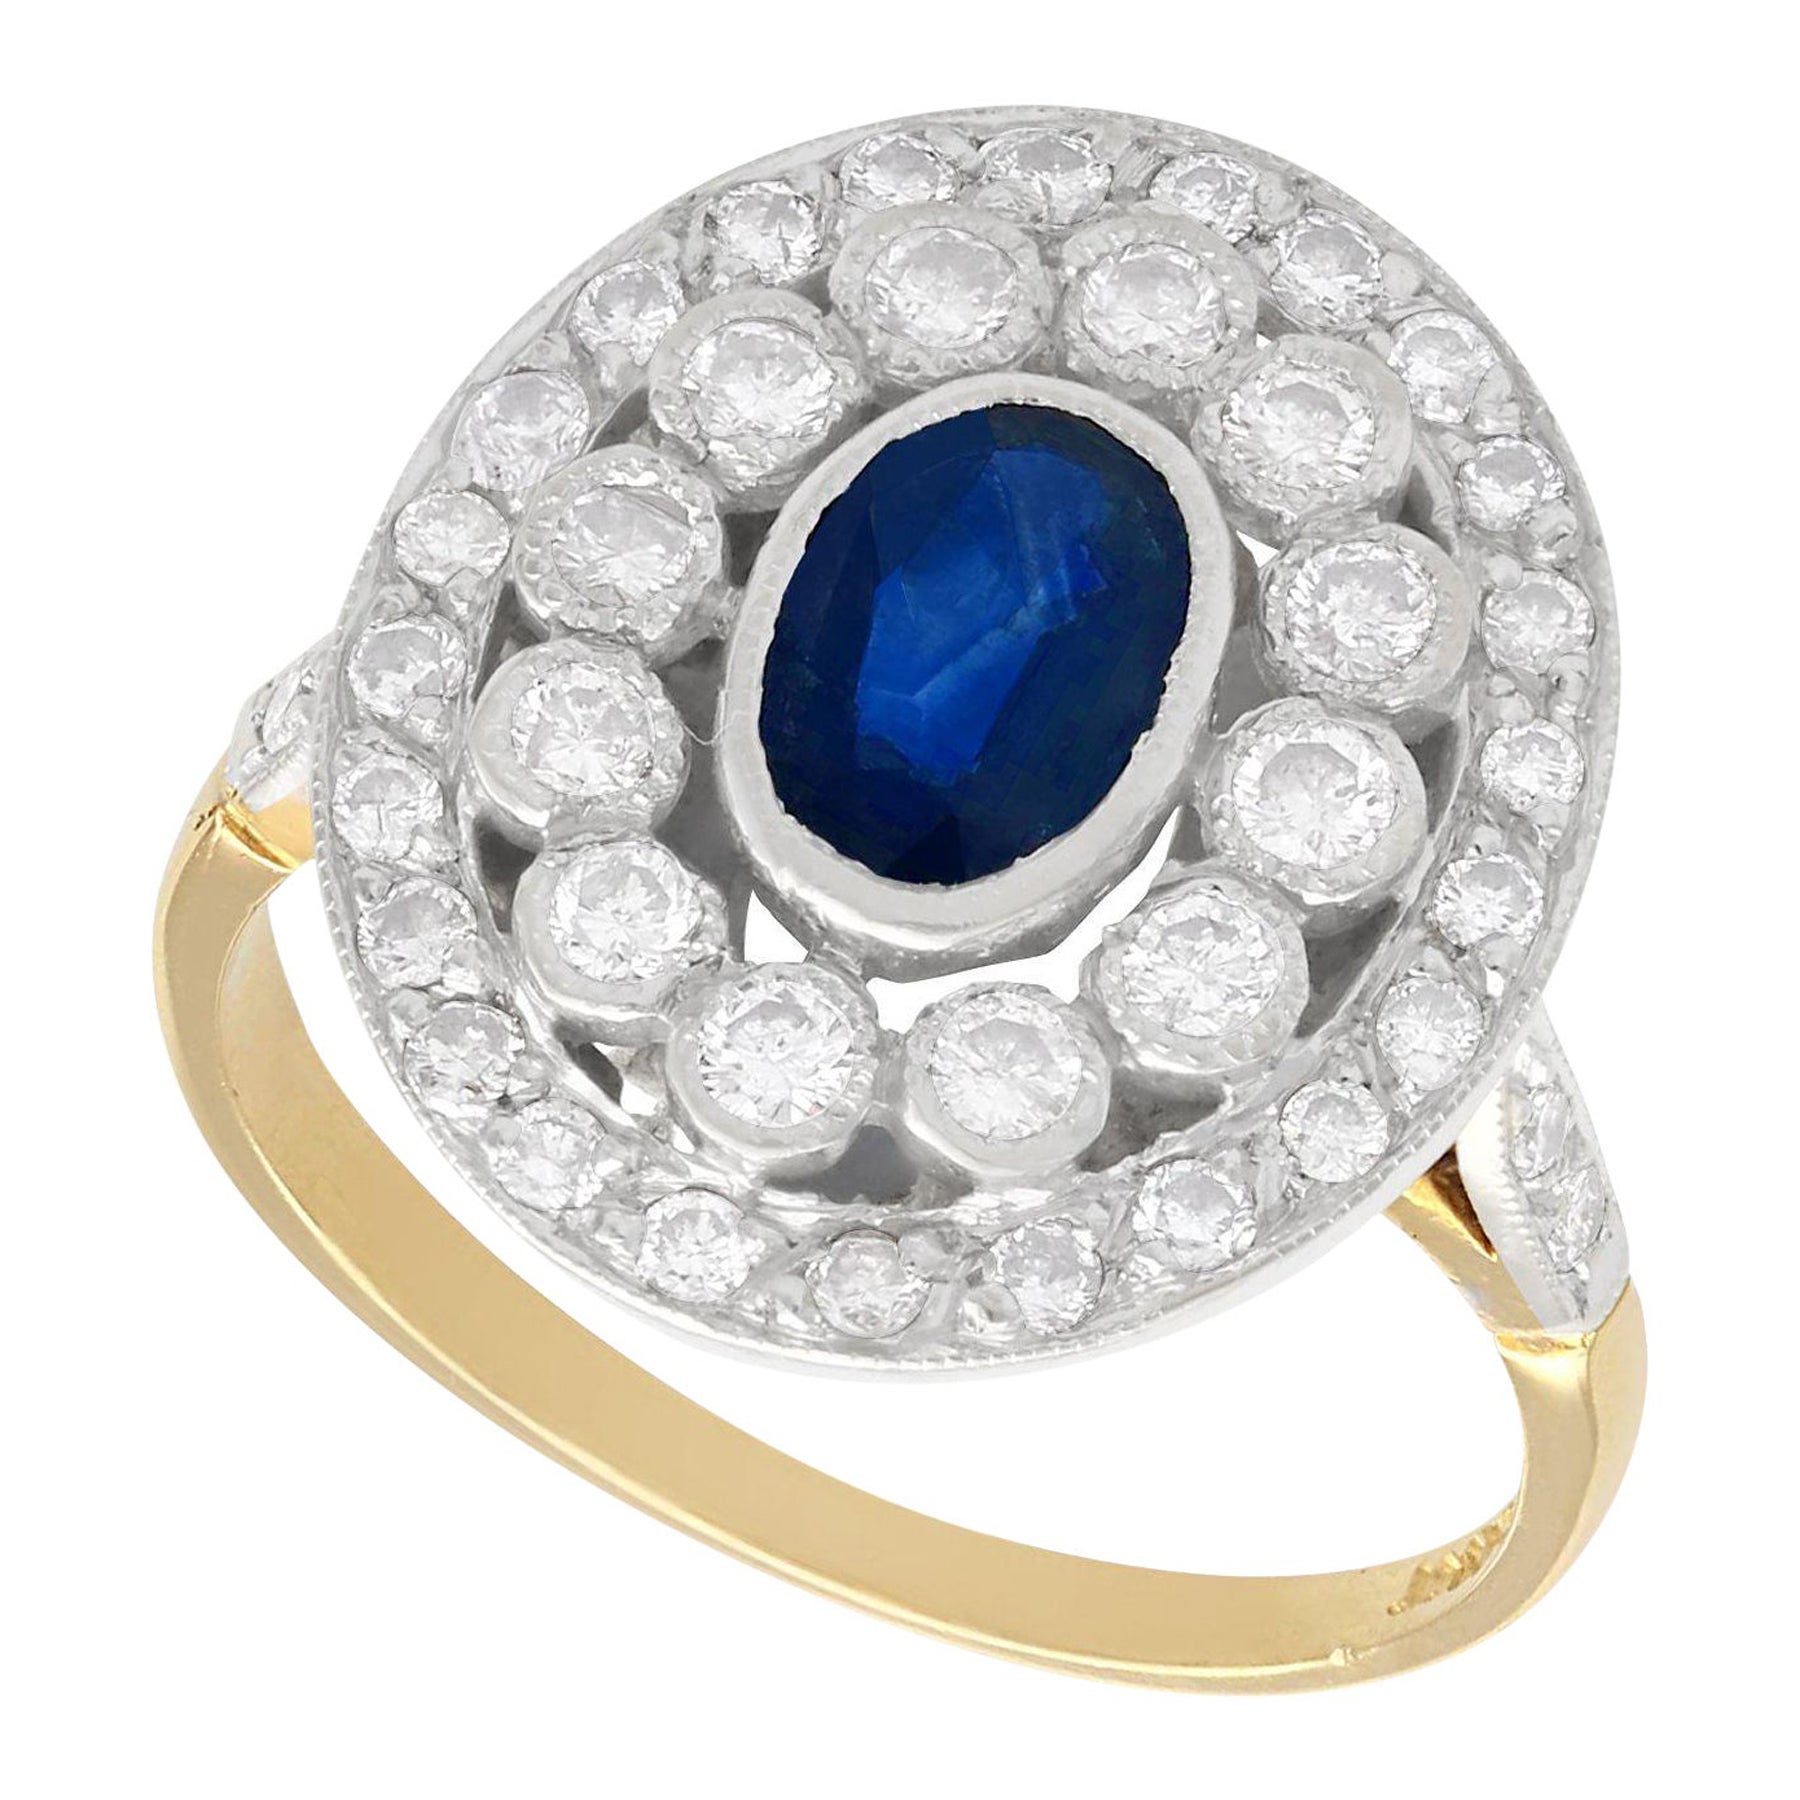 Vintage 0.75 Carat Sapphire and 1.02 Carat Diamond 18k Yellow Gold Dress Ring For Sale